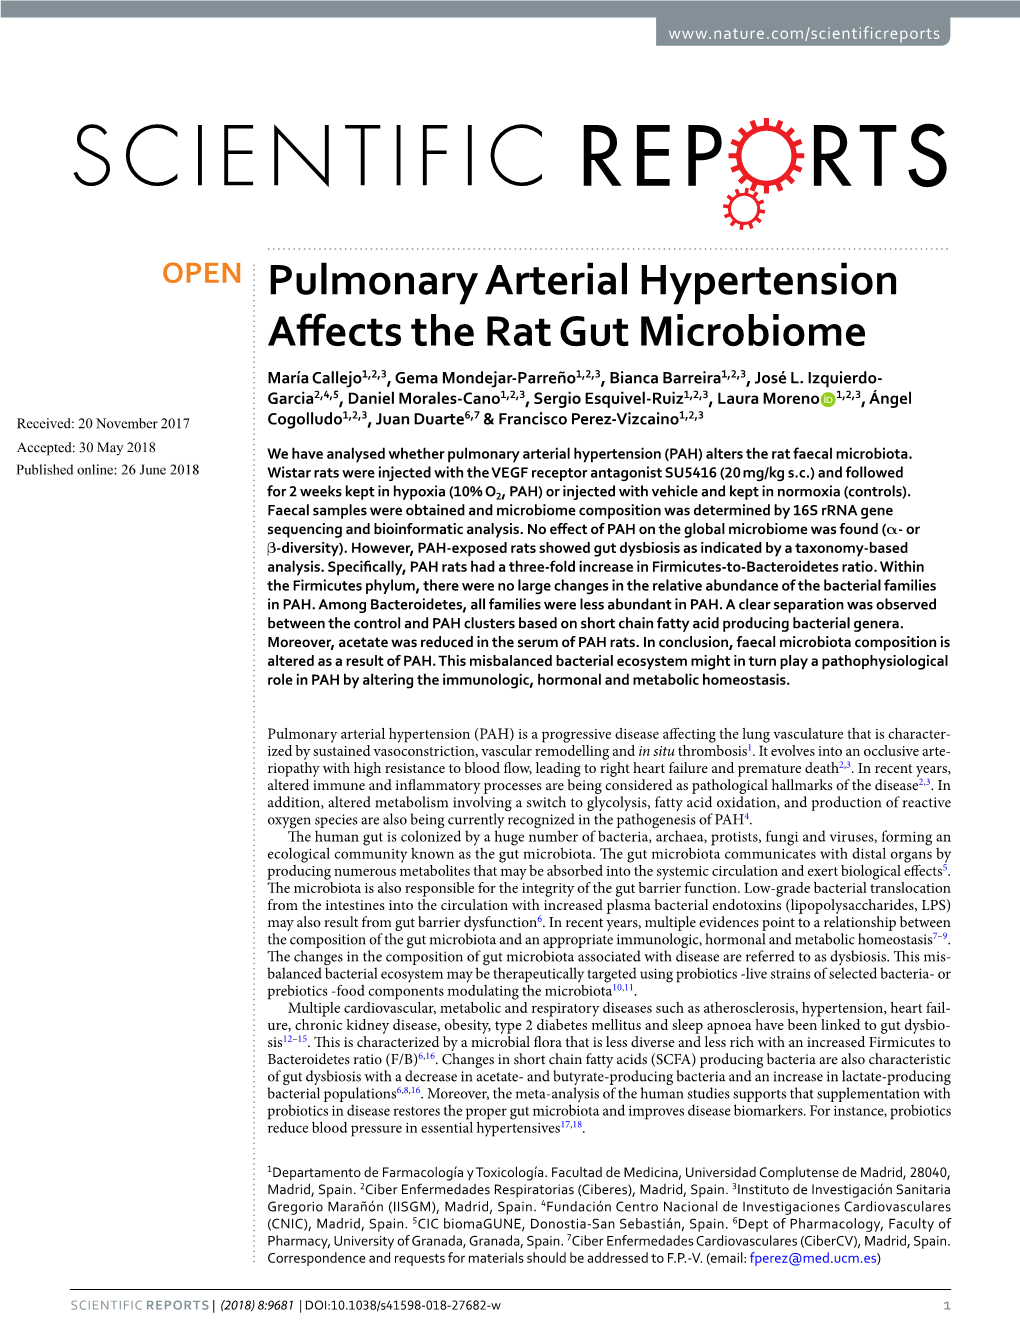 Pulmonary Arterial Hypertension Affects the Rat Gut Microbiome